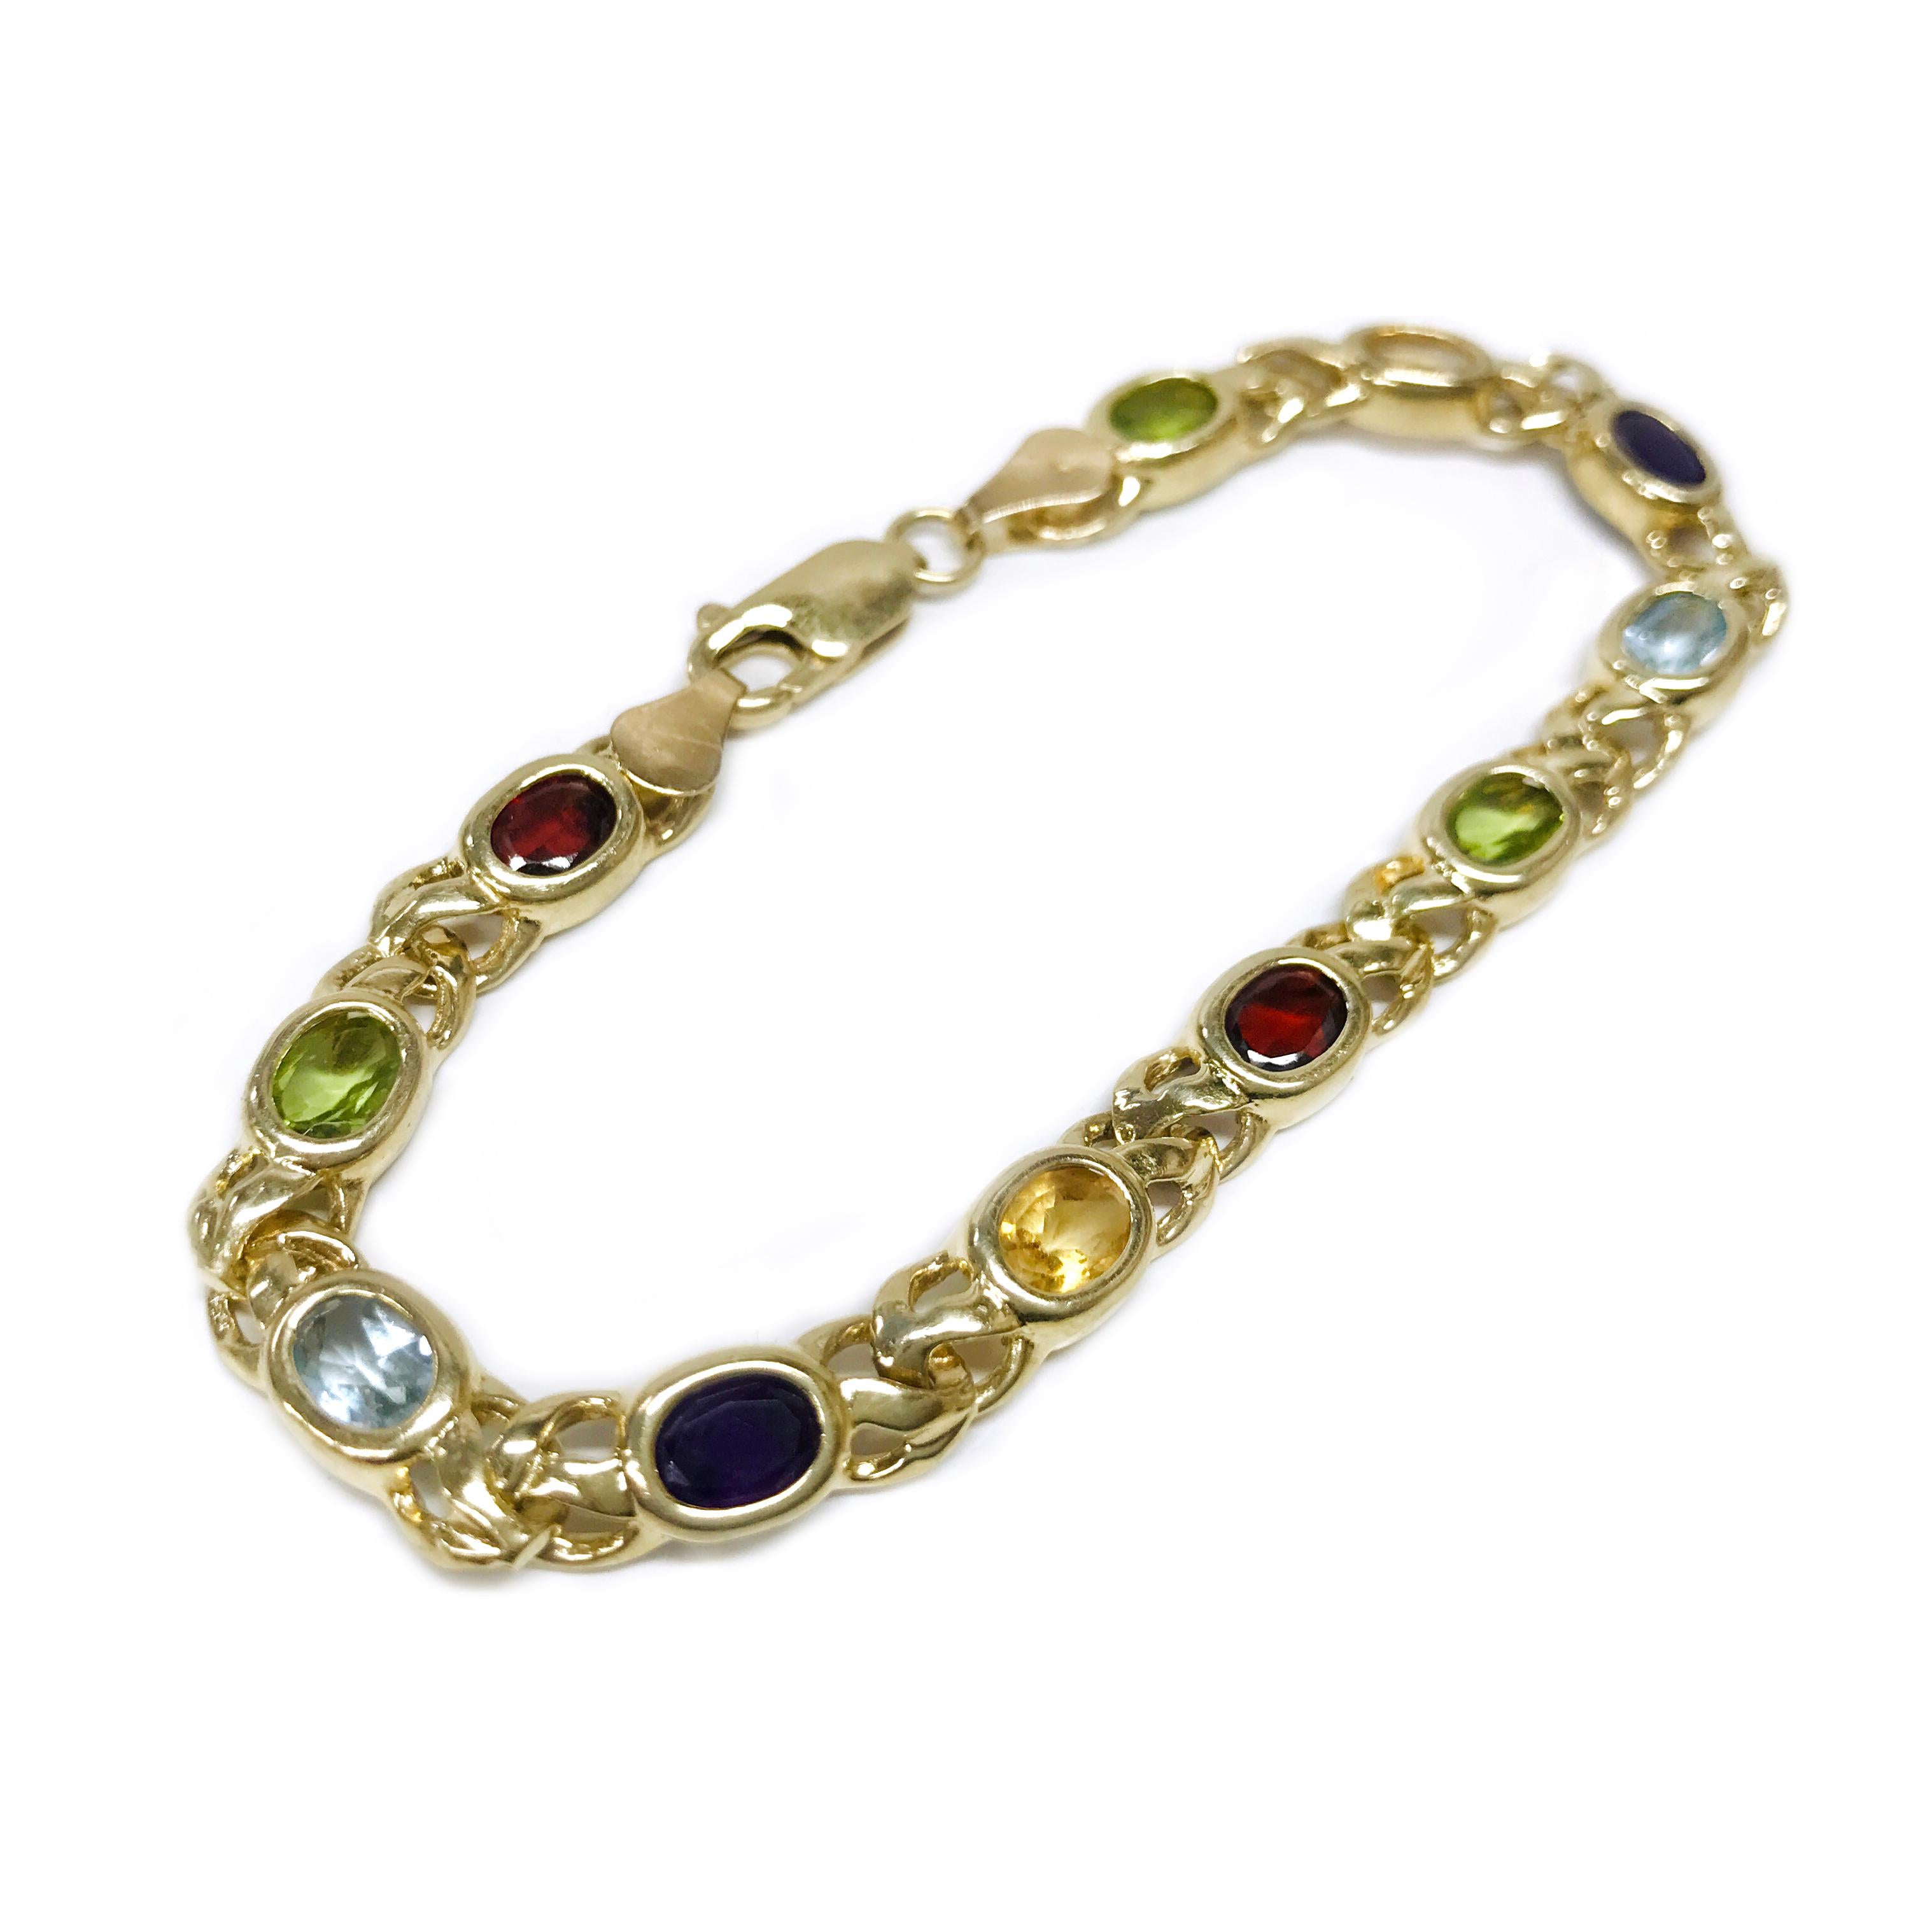 14 Karat Multi-Gemstone bracelet. This colorful link bracelet contains eleven oval faceted gemstones bezel-set in yellow gold, the bezel is approximately 6 x 4mm. The bracelet includes two garnets, two citrines, two amethyst, two aquamarines, and